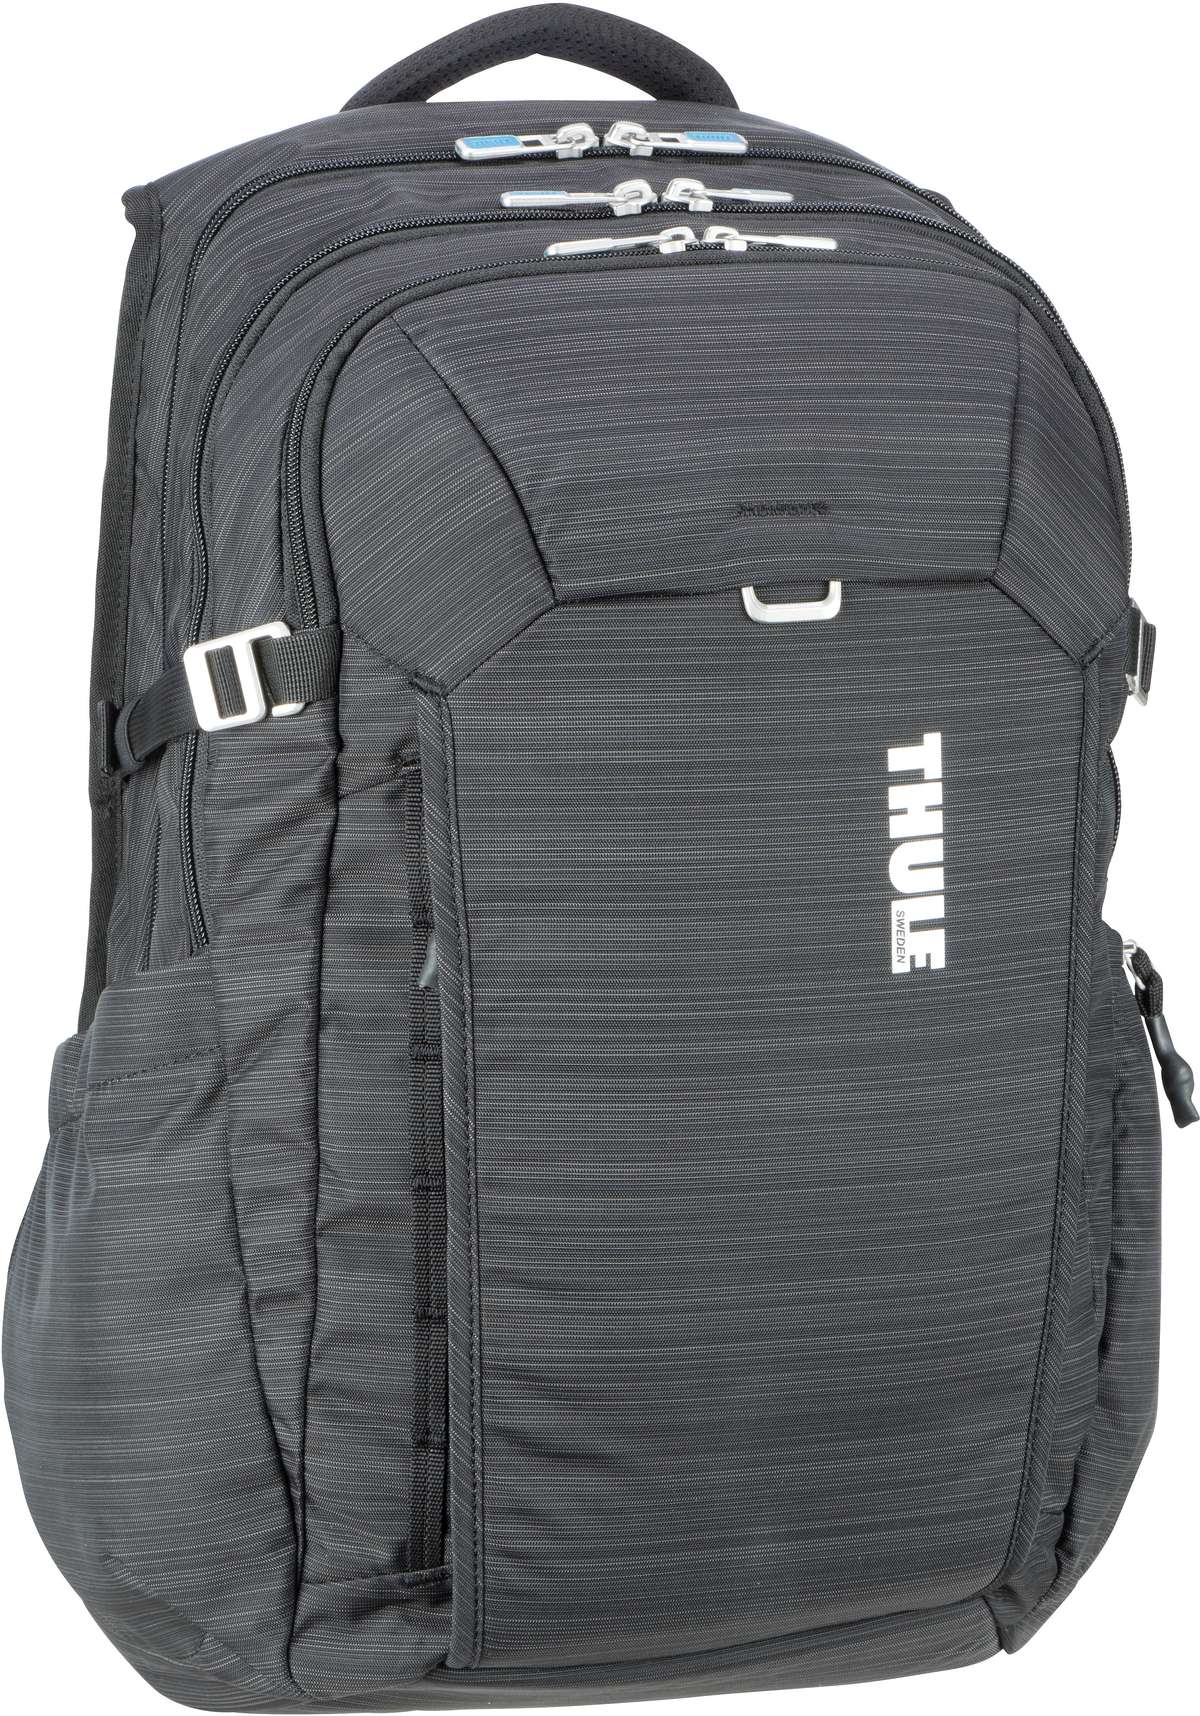 Thule Construct Backpack 28L - Black